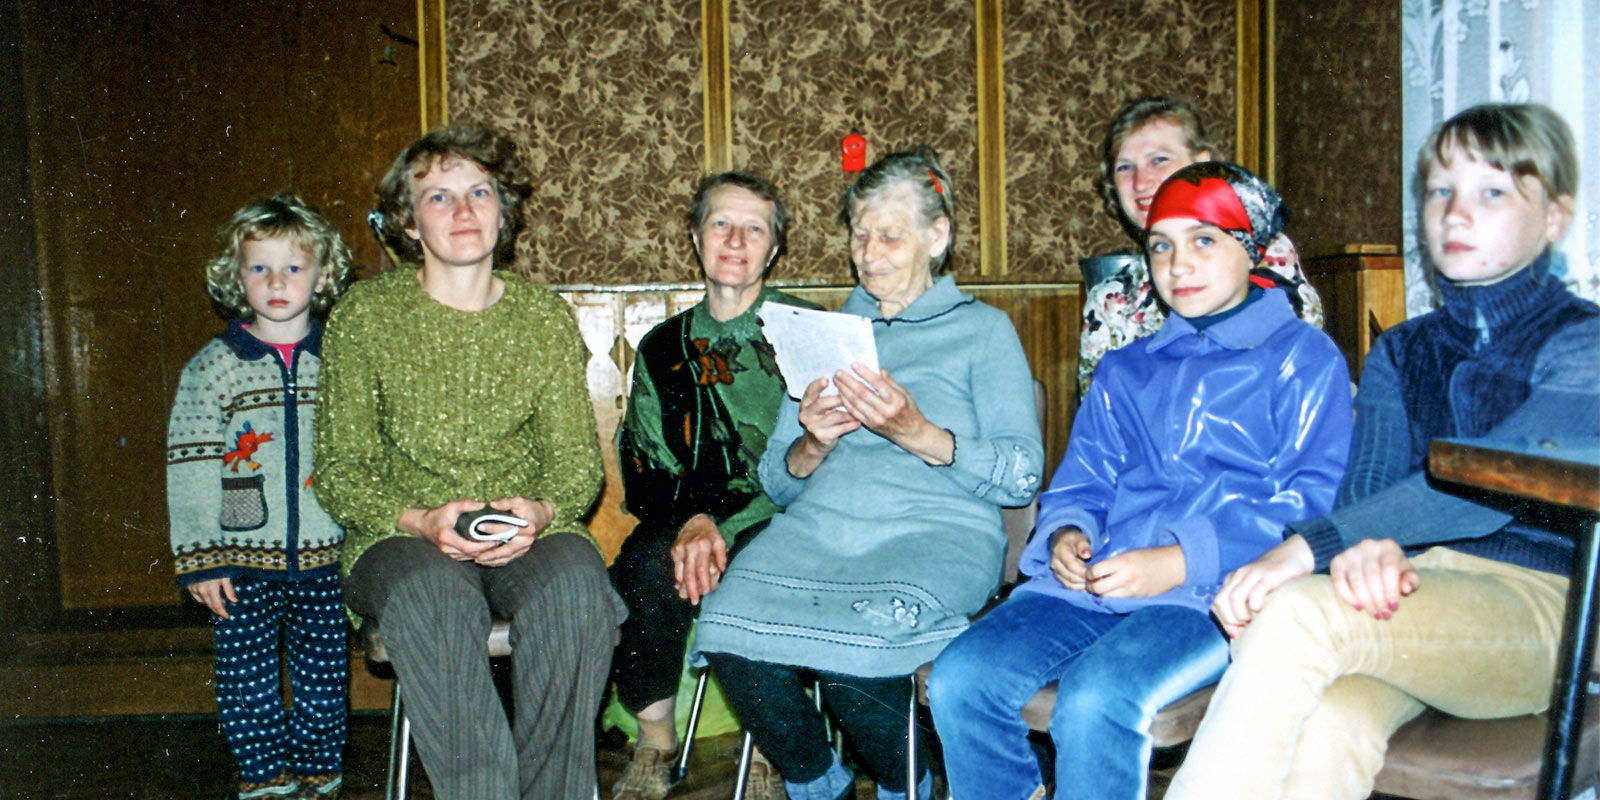 In the Koot family of Berezovka, both the old and the young can sing Estonian songs. New songs are constantly being learned from Elviine Klimson’s song treasury. From the left: Elviira, Larissa, and Agnessa Koot, Elviine Klimson, Alla, Maie, and Olga Koot. Photo: A. Korb 2004.